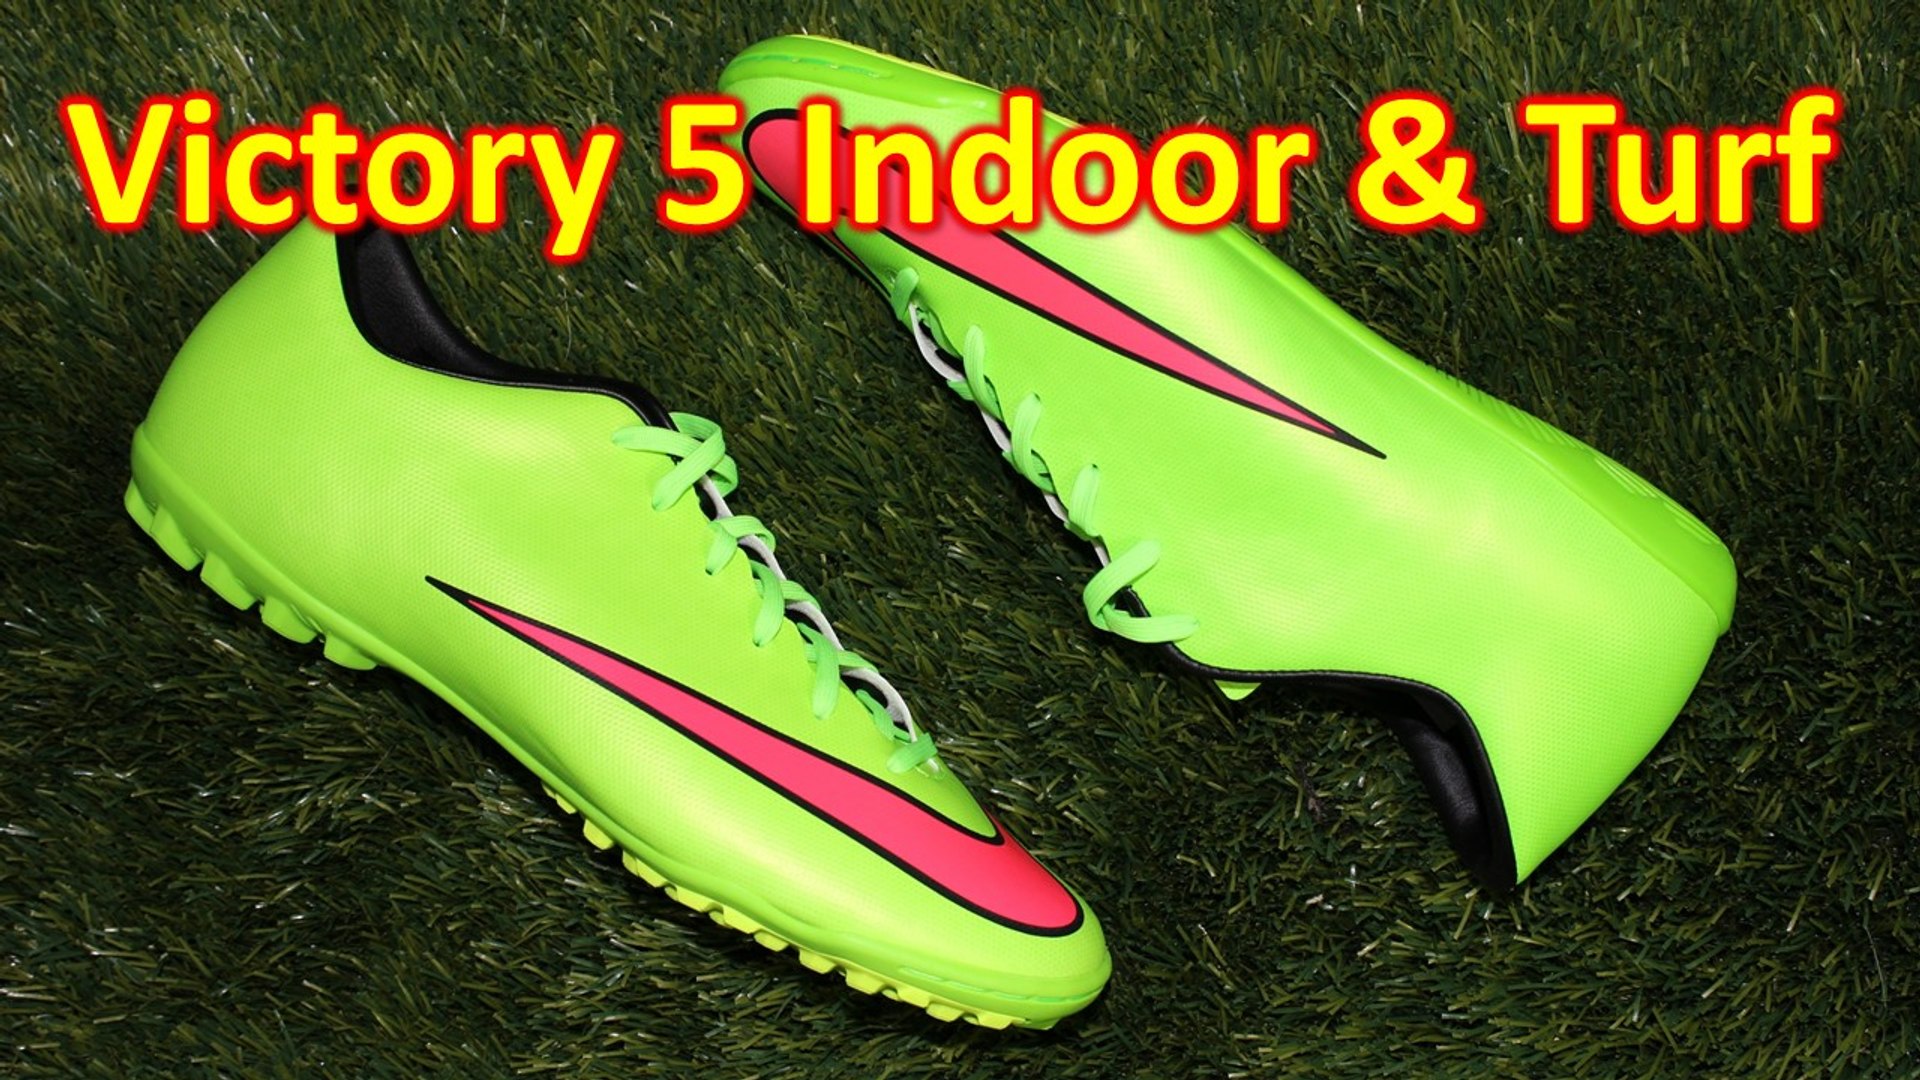 Nike Mercurial Victory 5 Indoor And Turf - Review & On Feet - video  Dailymotion